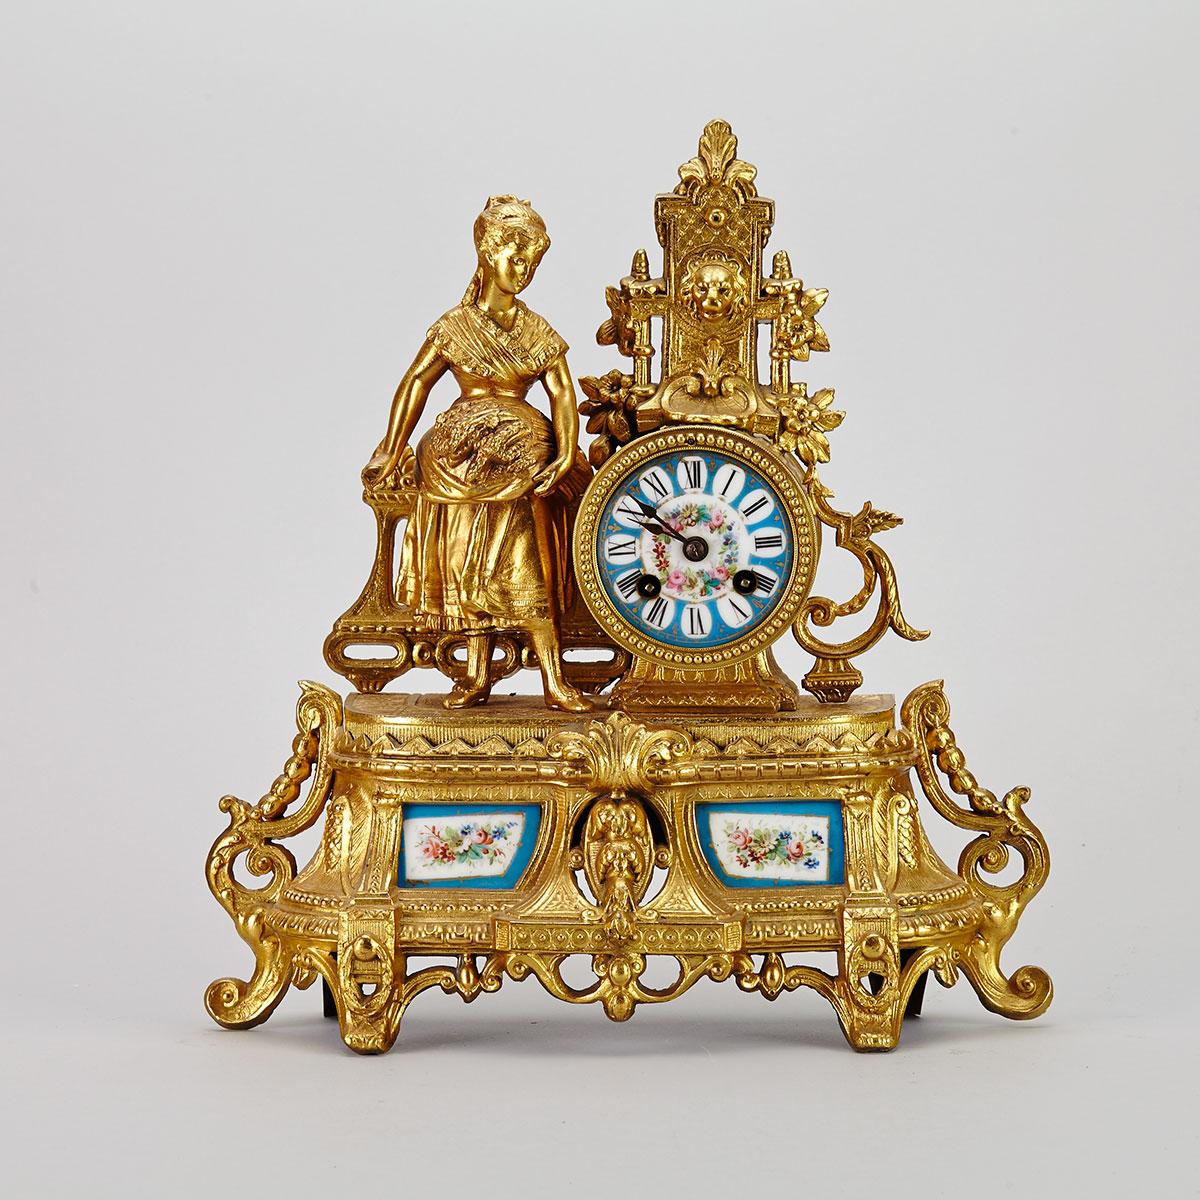 French Louis XVI Style Sevres Porcelain Mounted Gilt Metal FIgural Mantle Clock, 19th century